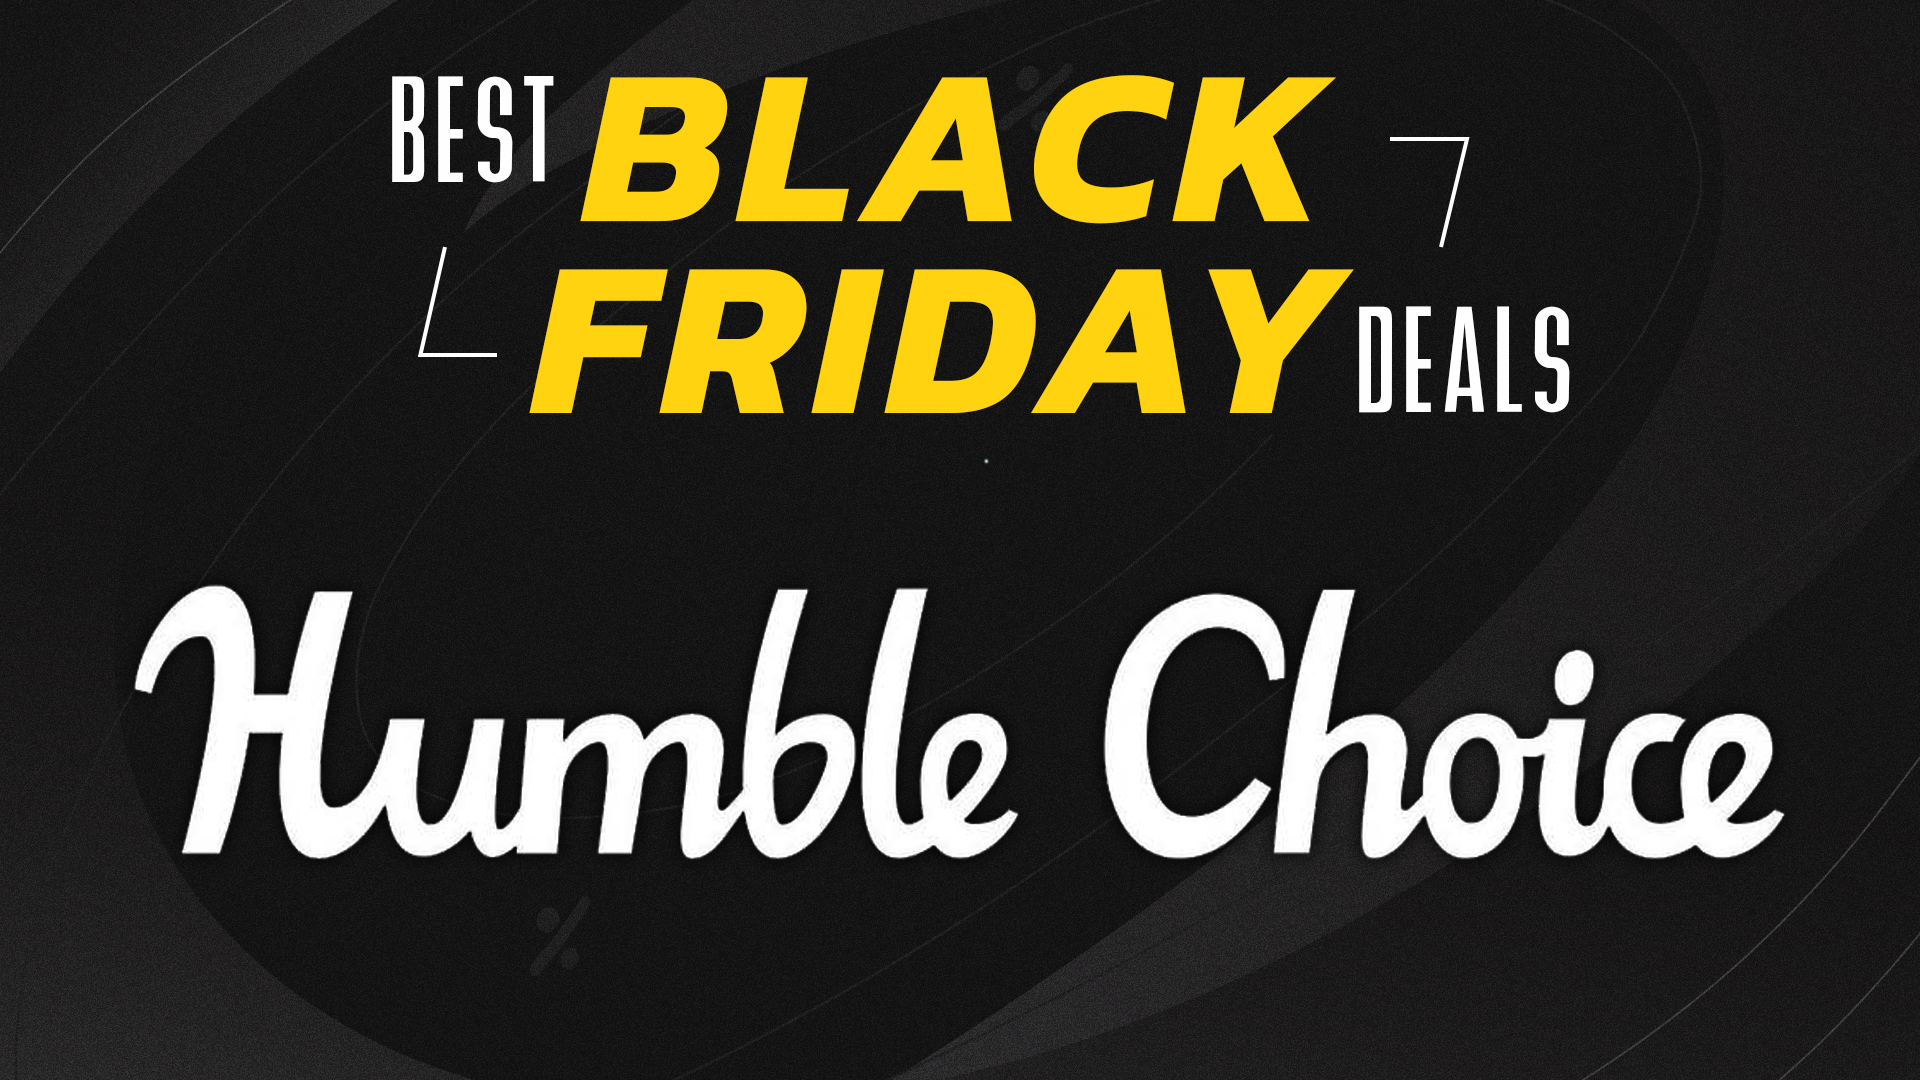 Humble Choice Discount Code - Get an annual membership for only $89!